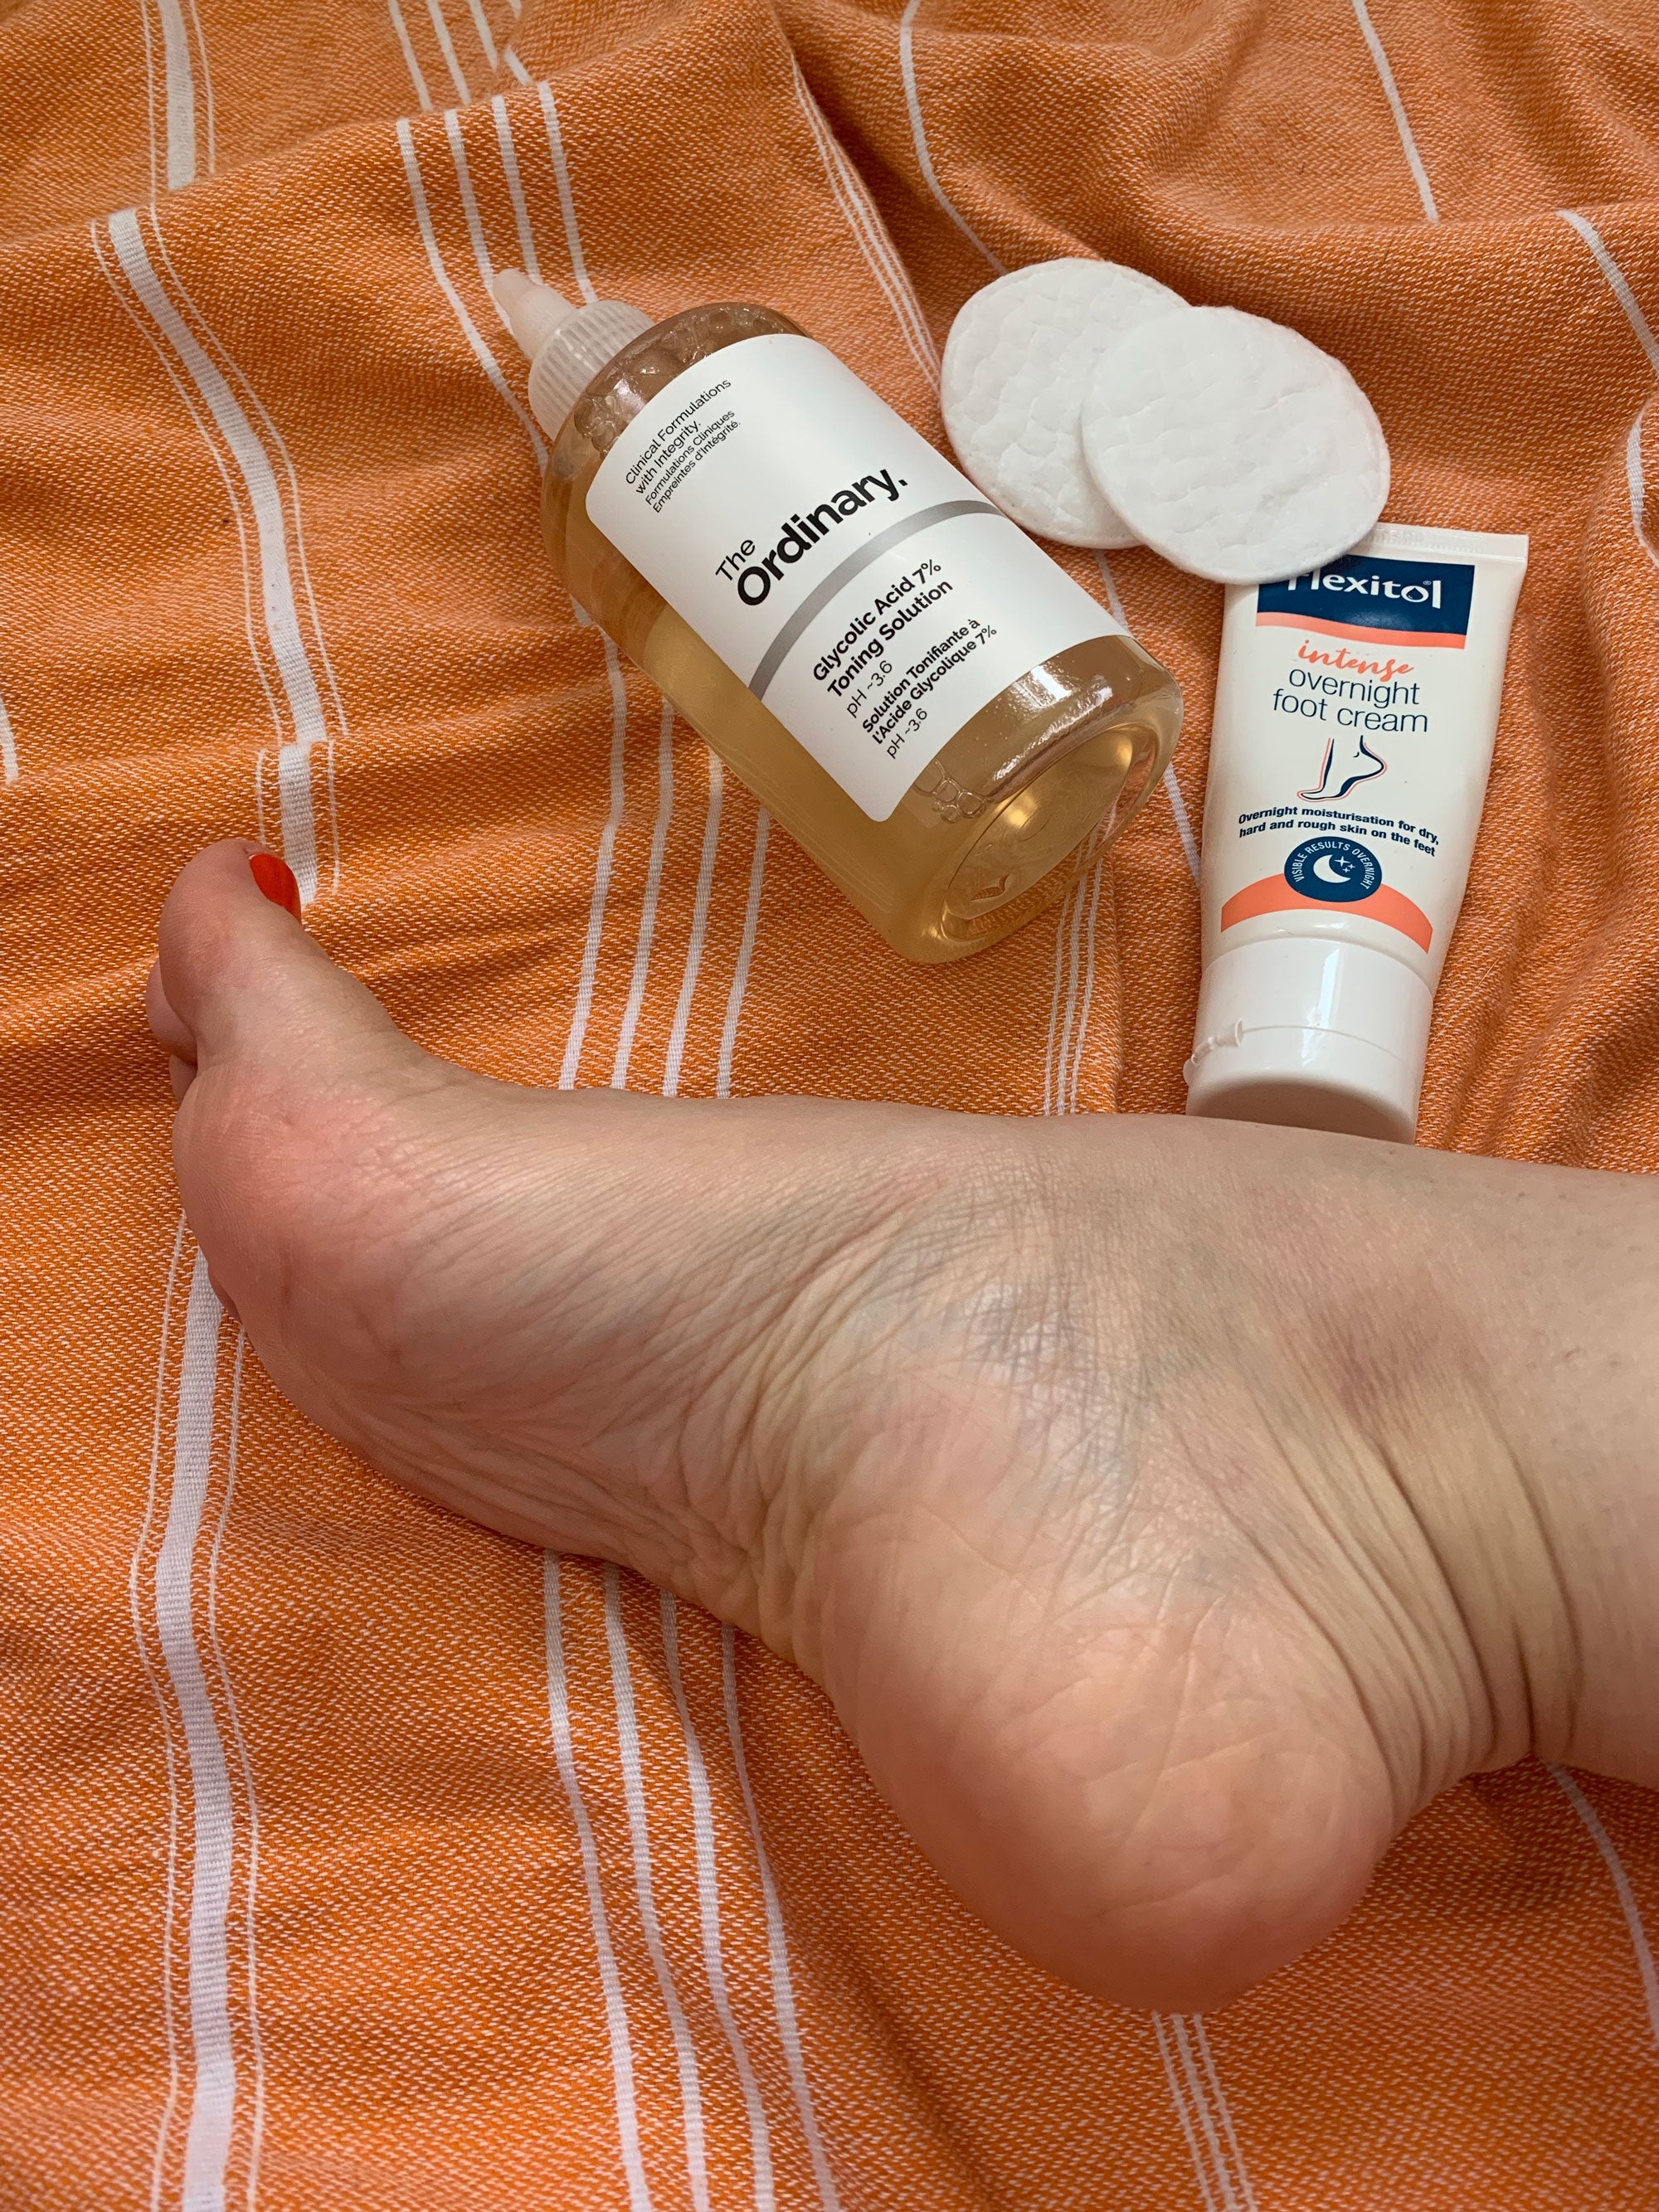 Tips for Moisturizing Your Feet to Keep Them Soft